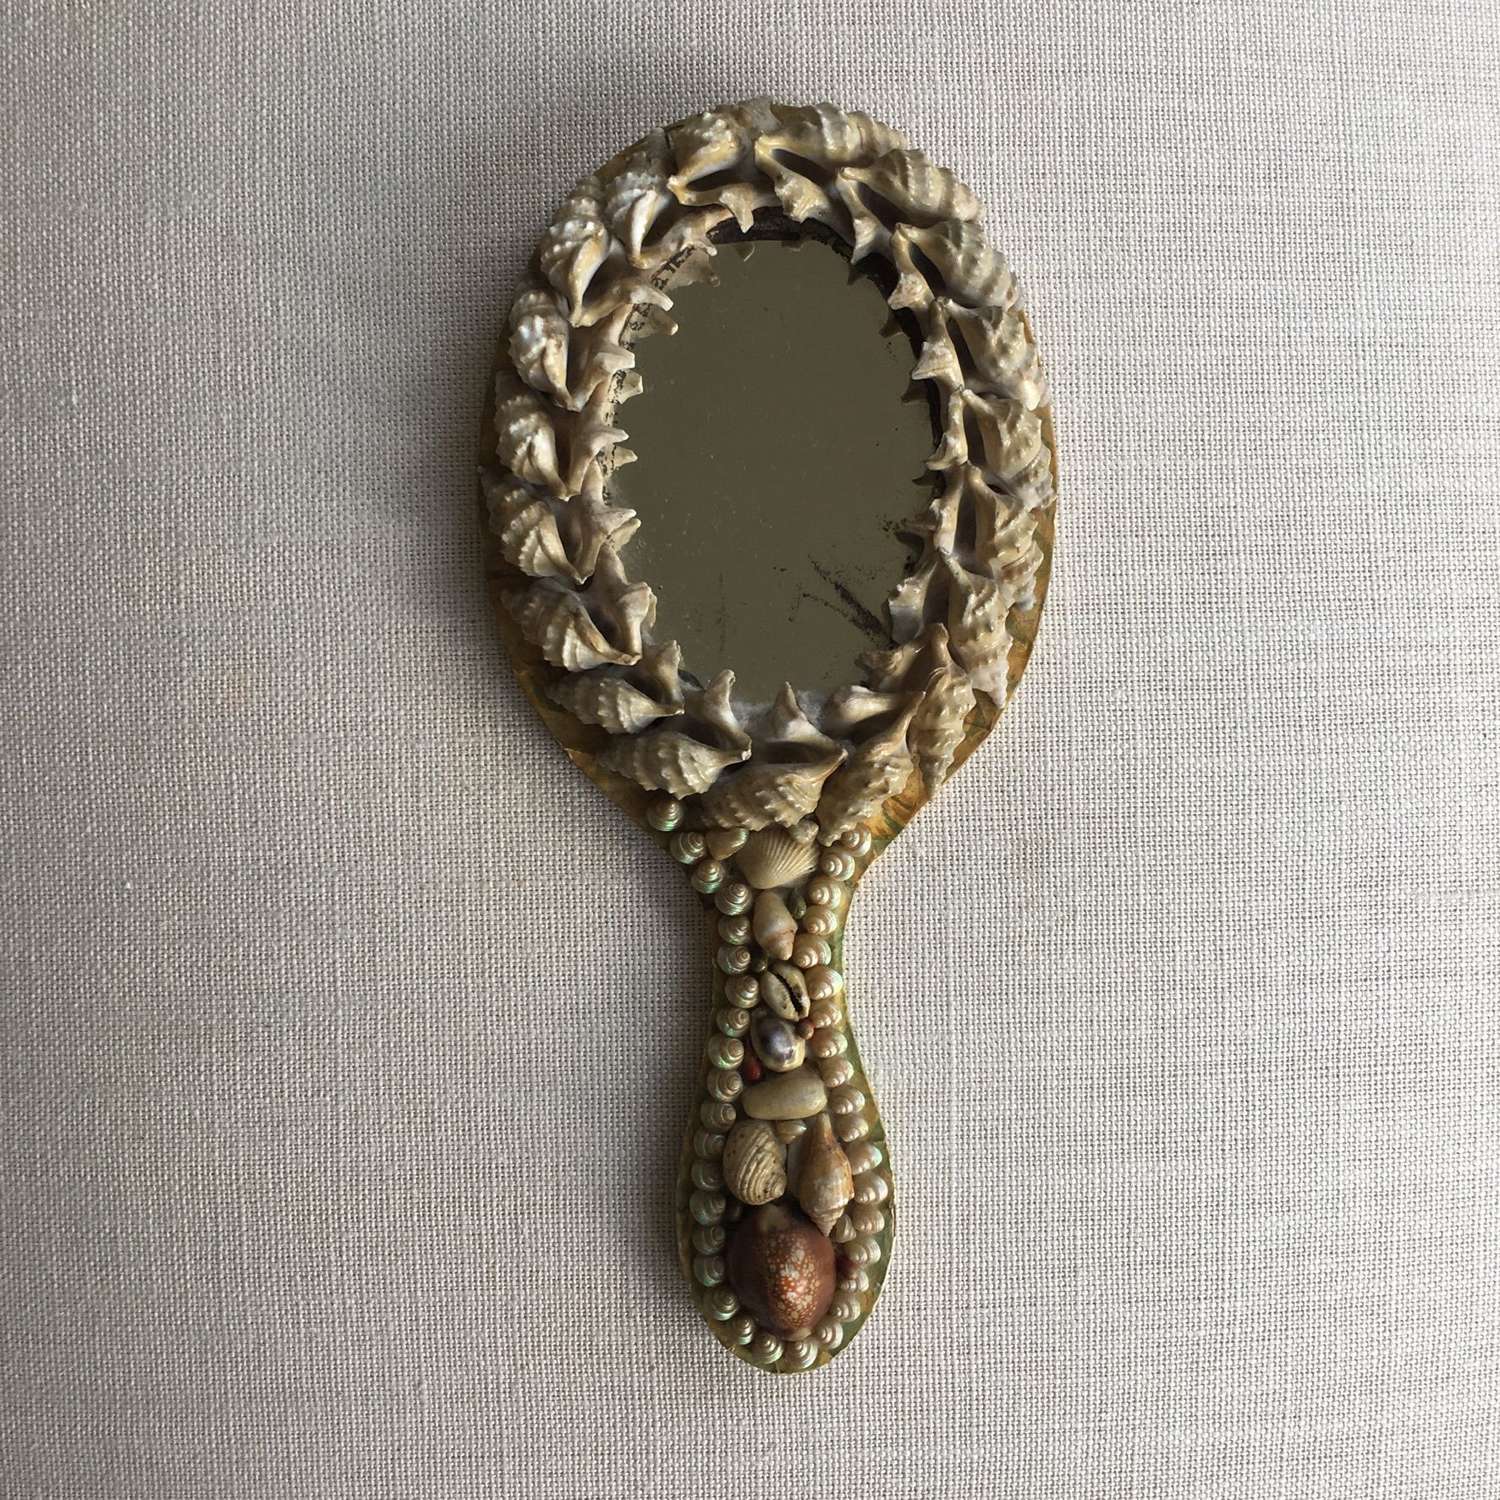 Vintage shell hanging or hand mirror